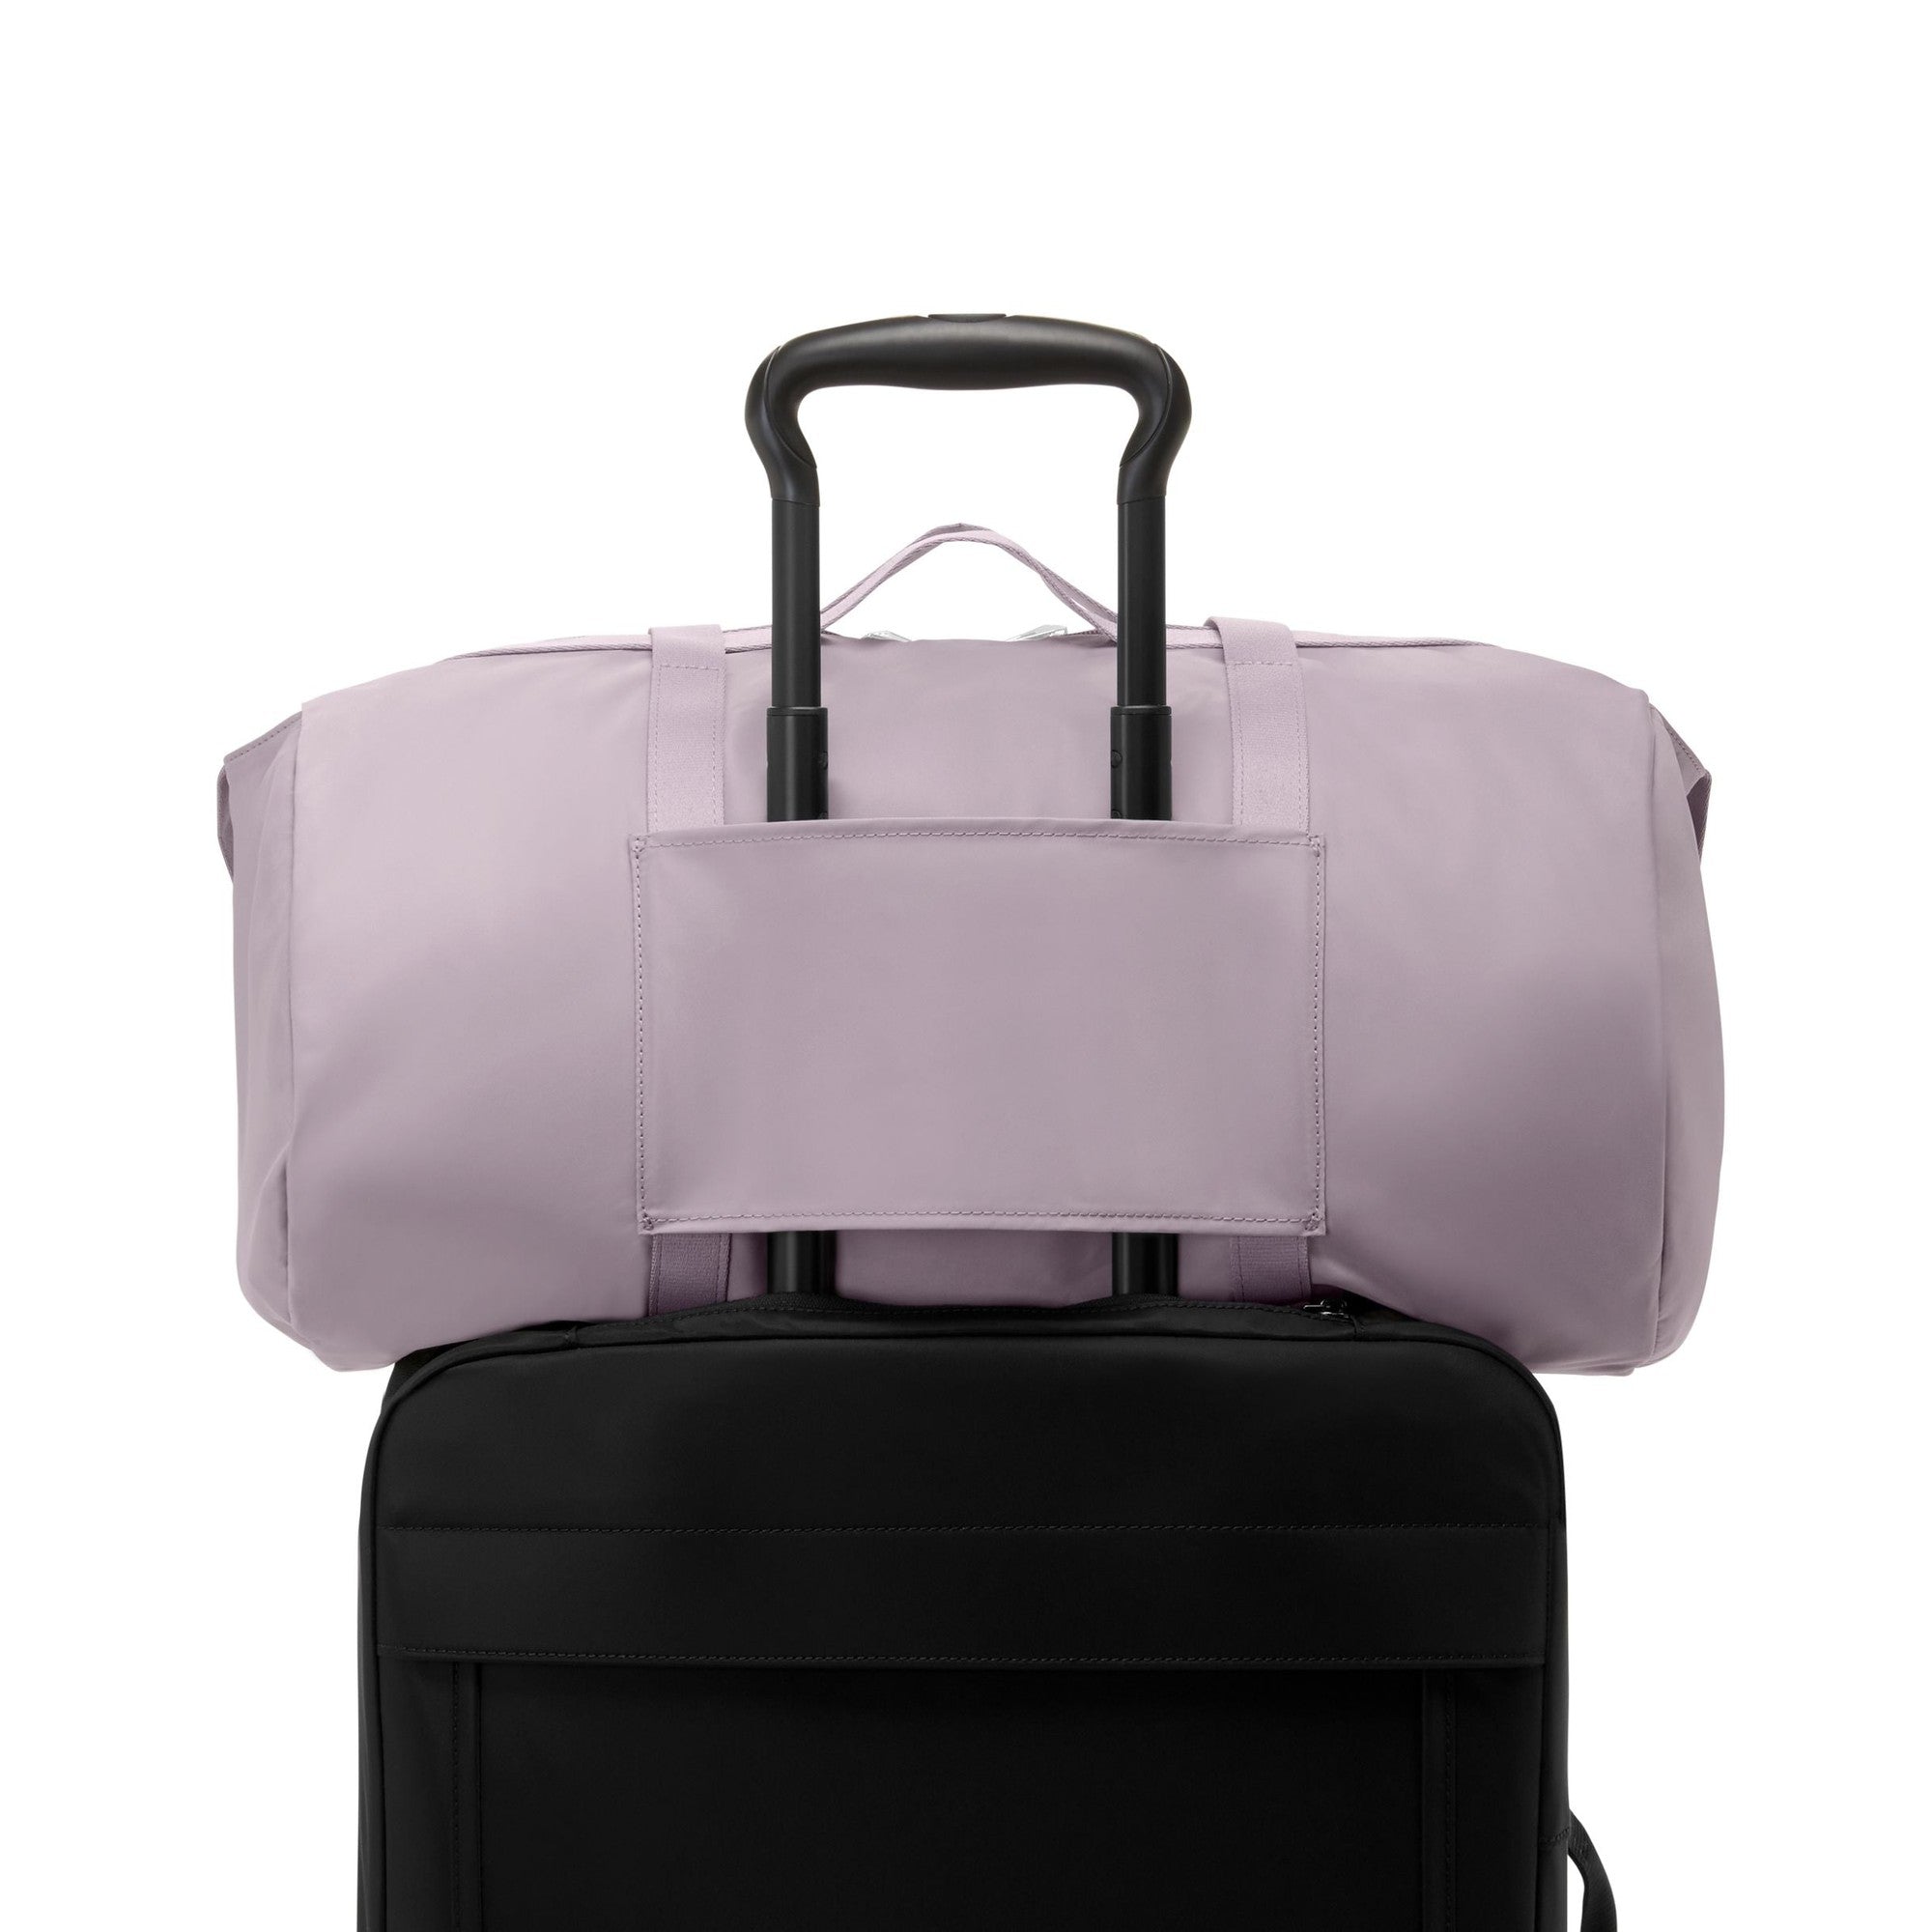 Tumi Leather Travel Luggage Adjustable Straps for sale